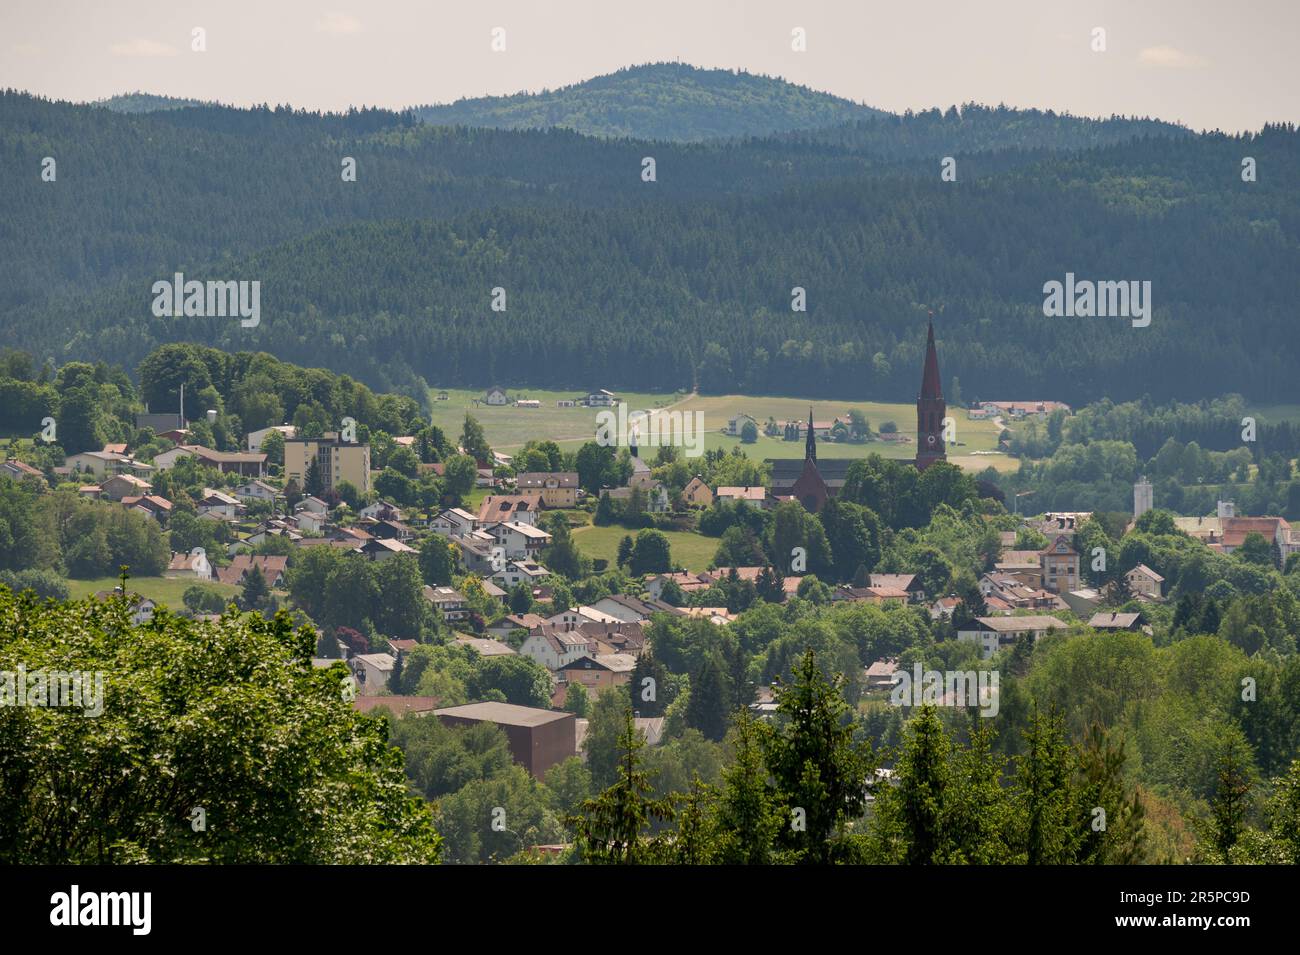 Scenic overview of the town Zwiesel in Bavaria, Germany on sunny day with clouds Stock Photo